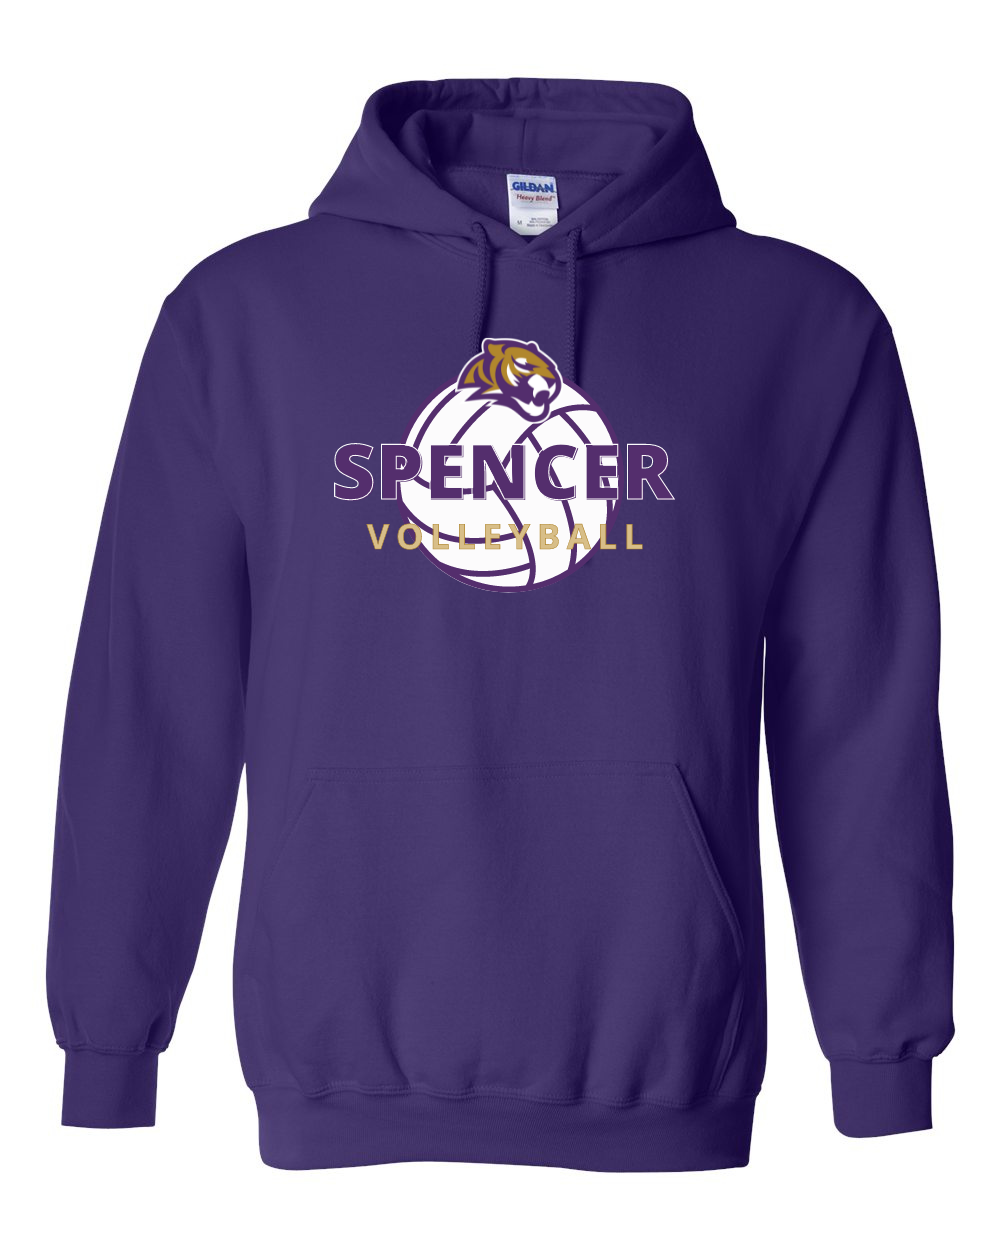 Adult Heavy Blend Hooded Sweatshirt | Spencer Tigers Volleyball